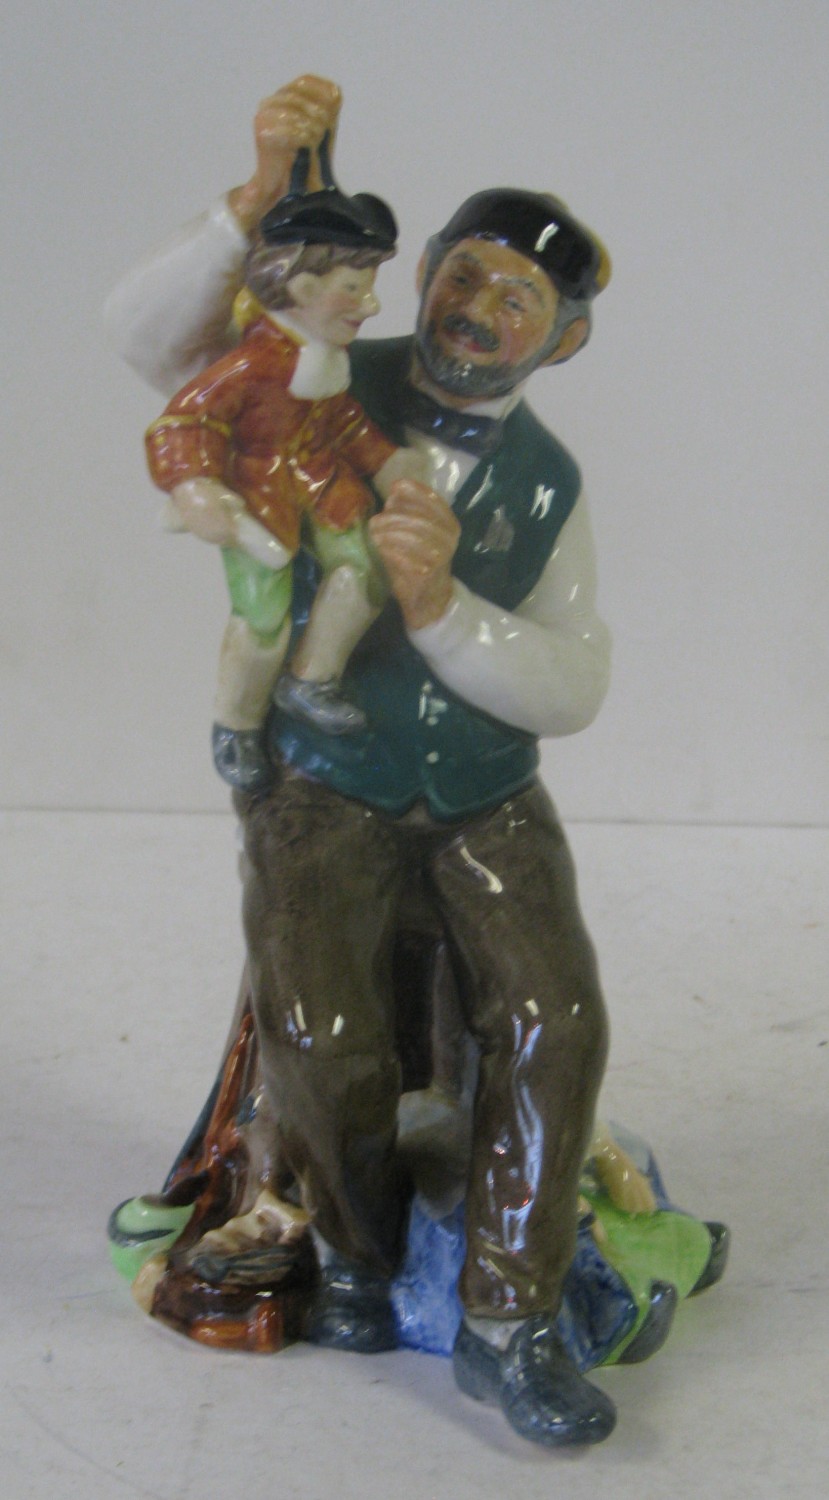 A Royal Doulton Figurine "The Puppet Maker" HN2253